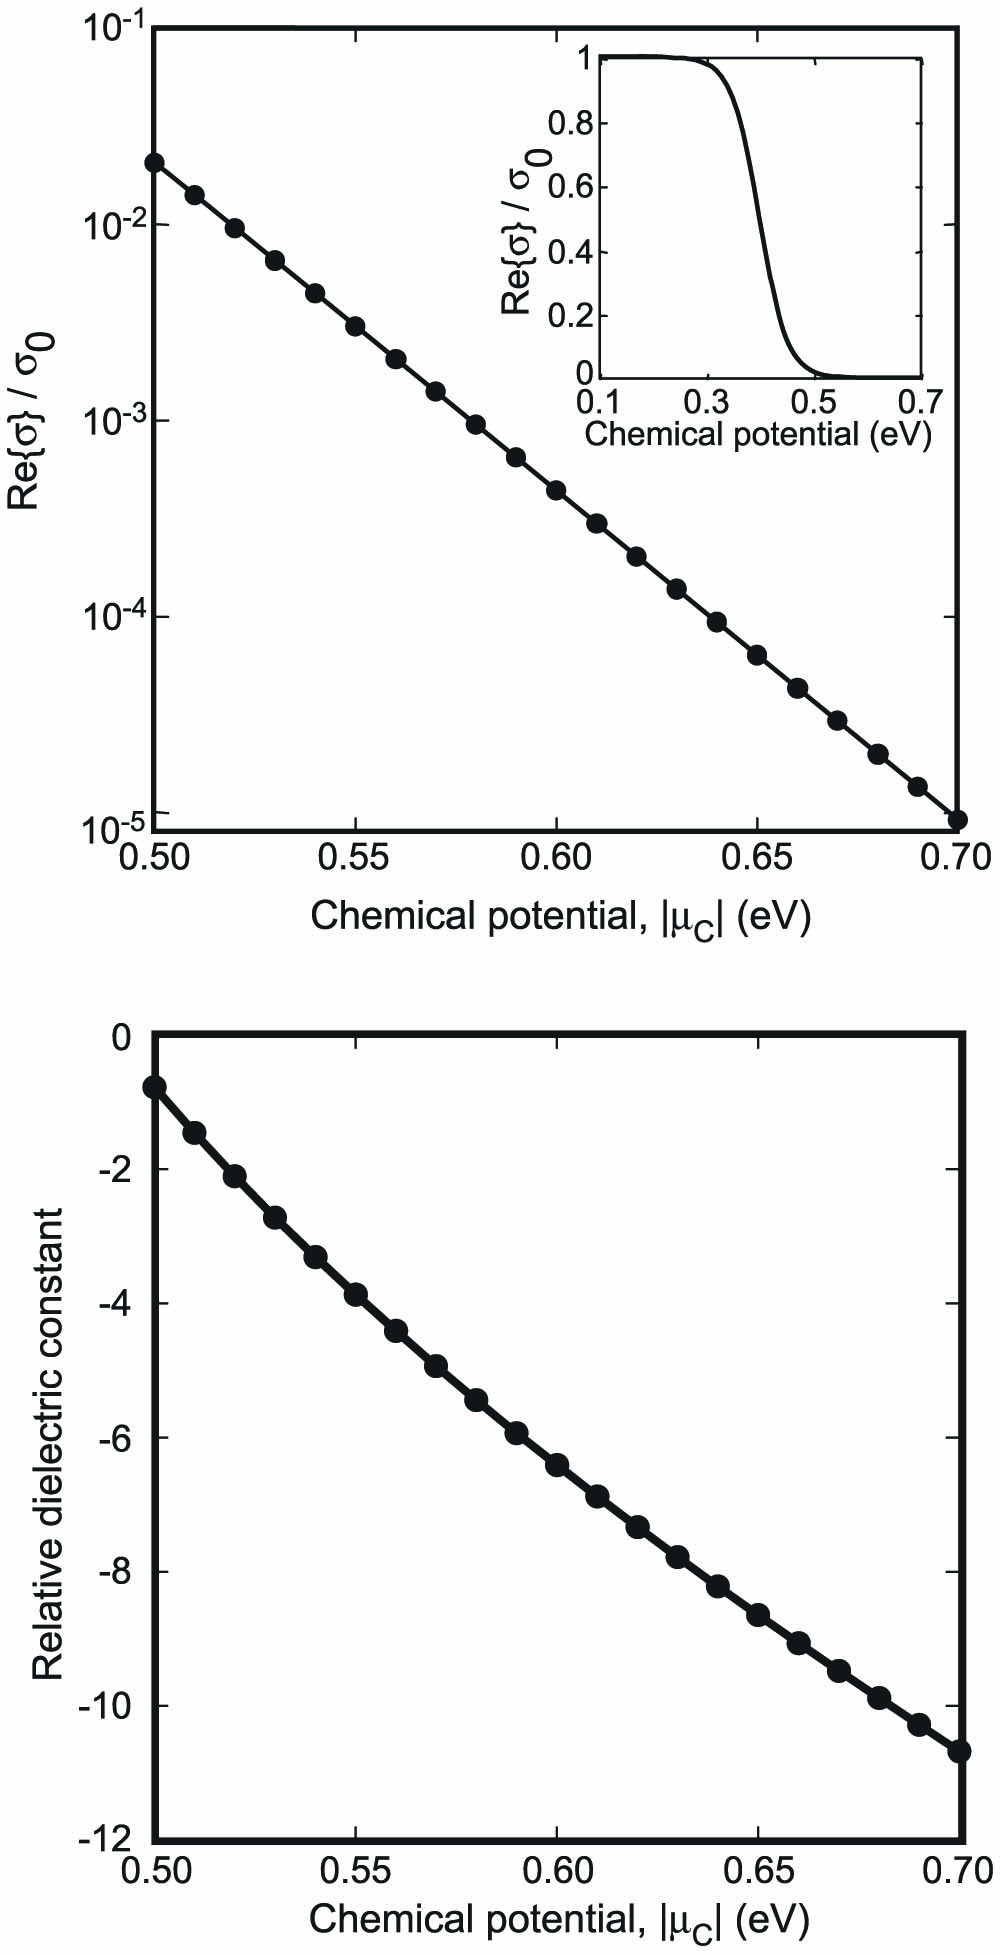 Upper panel: real part of the graphene conductivity for ℏω=0.8 eV (corresponding to a free-space wavelength equal to 1550 nm) versus the applied chemical potential μC. Inset: same quantity on a broader range of applied chemical potentials. Lower panel: relative dielectric constant of graphene versus the applied chemical potential.